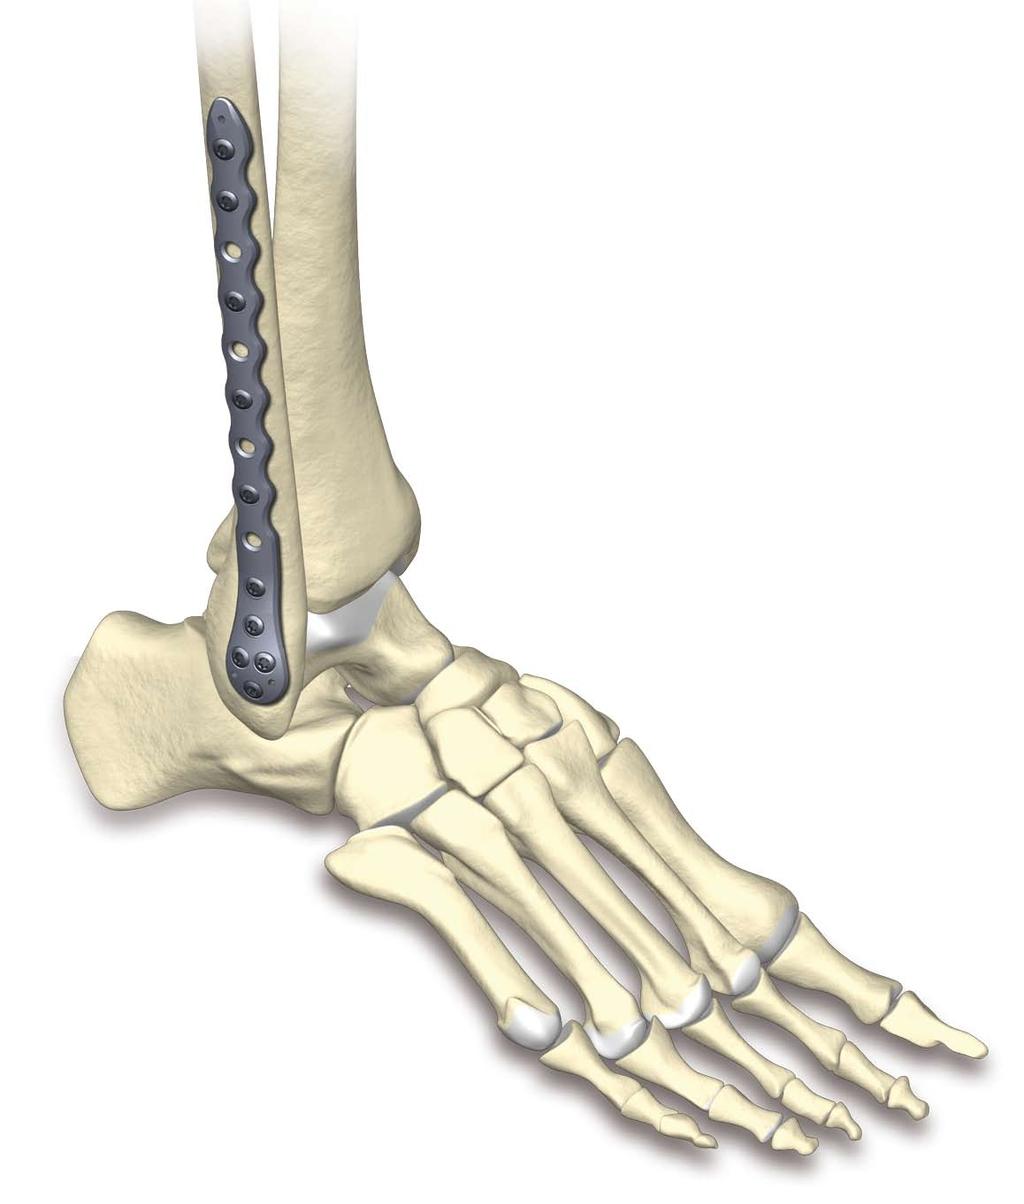 Indications, Precautions & Contraindications Indications The VariAx Distal Lateral Fibula Locking Plate System is intended for use in internal fixation of the distal fibula.